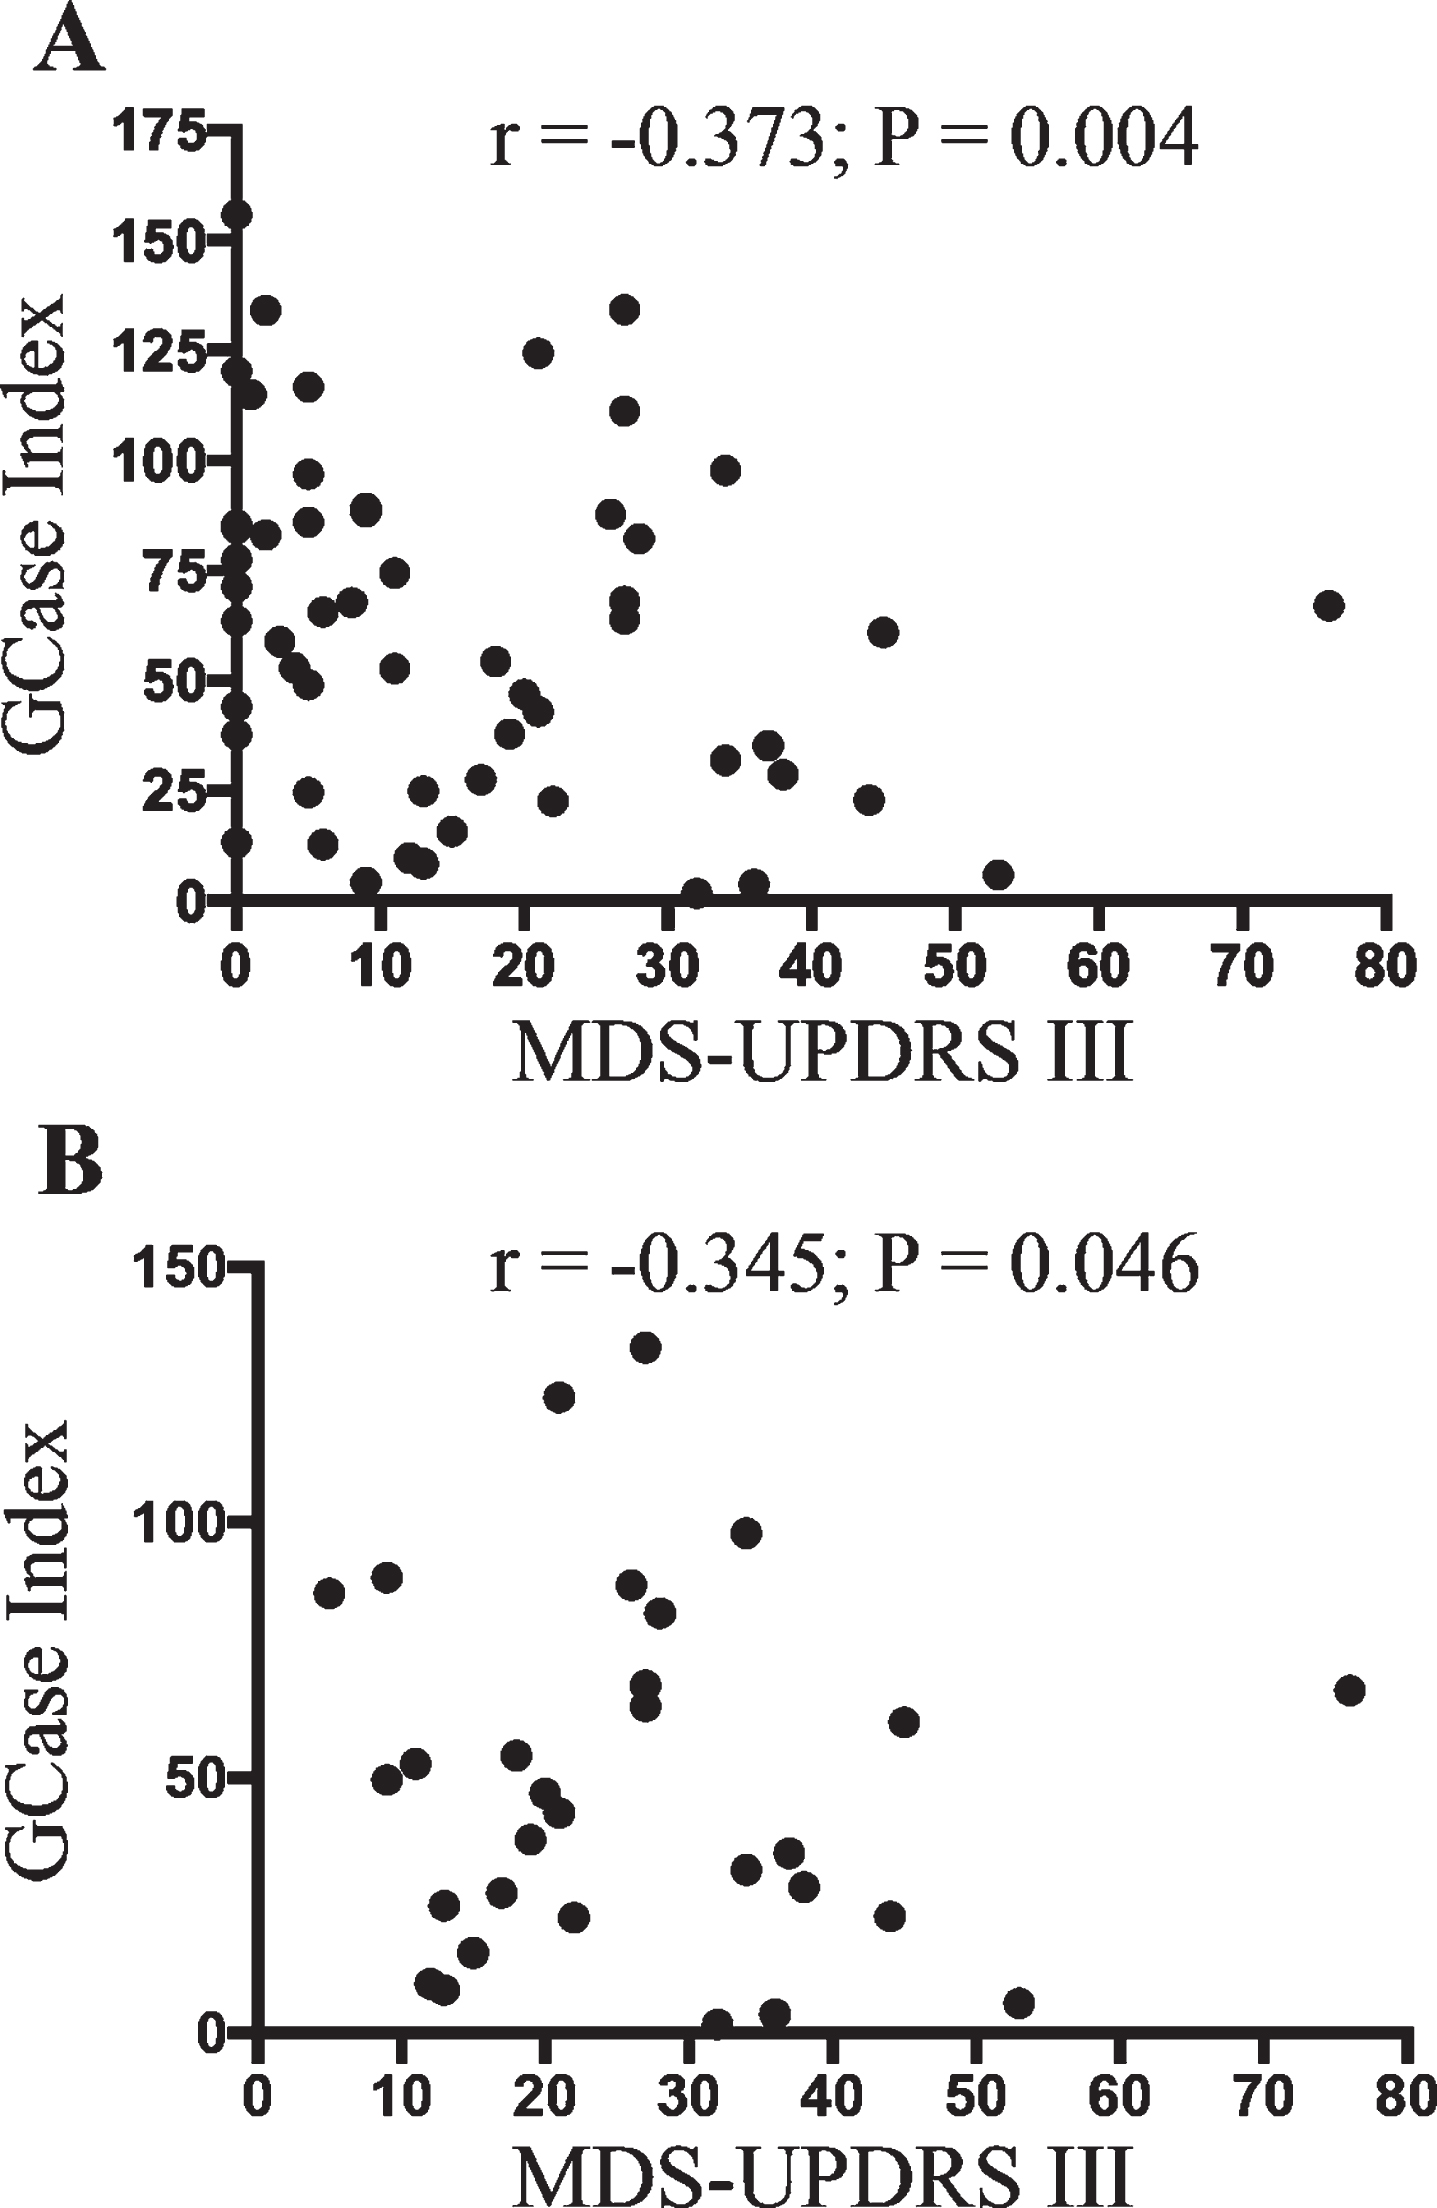 Classical monocyte GCase activity negatively correlates with PD motor severity. Partial correlation analysis covarying for age, sex, percent of monocytes in PBMCs and storage time in months showed a significant association between classical monocyte GCase activity and participant UPDRSIII score when the whole cohort was included (A) (n = 55), or when just PD patients were included (B) (n = 30).